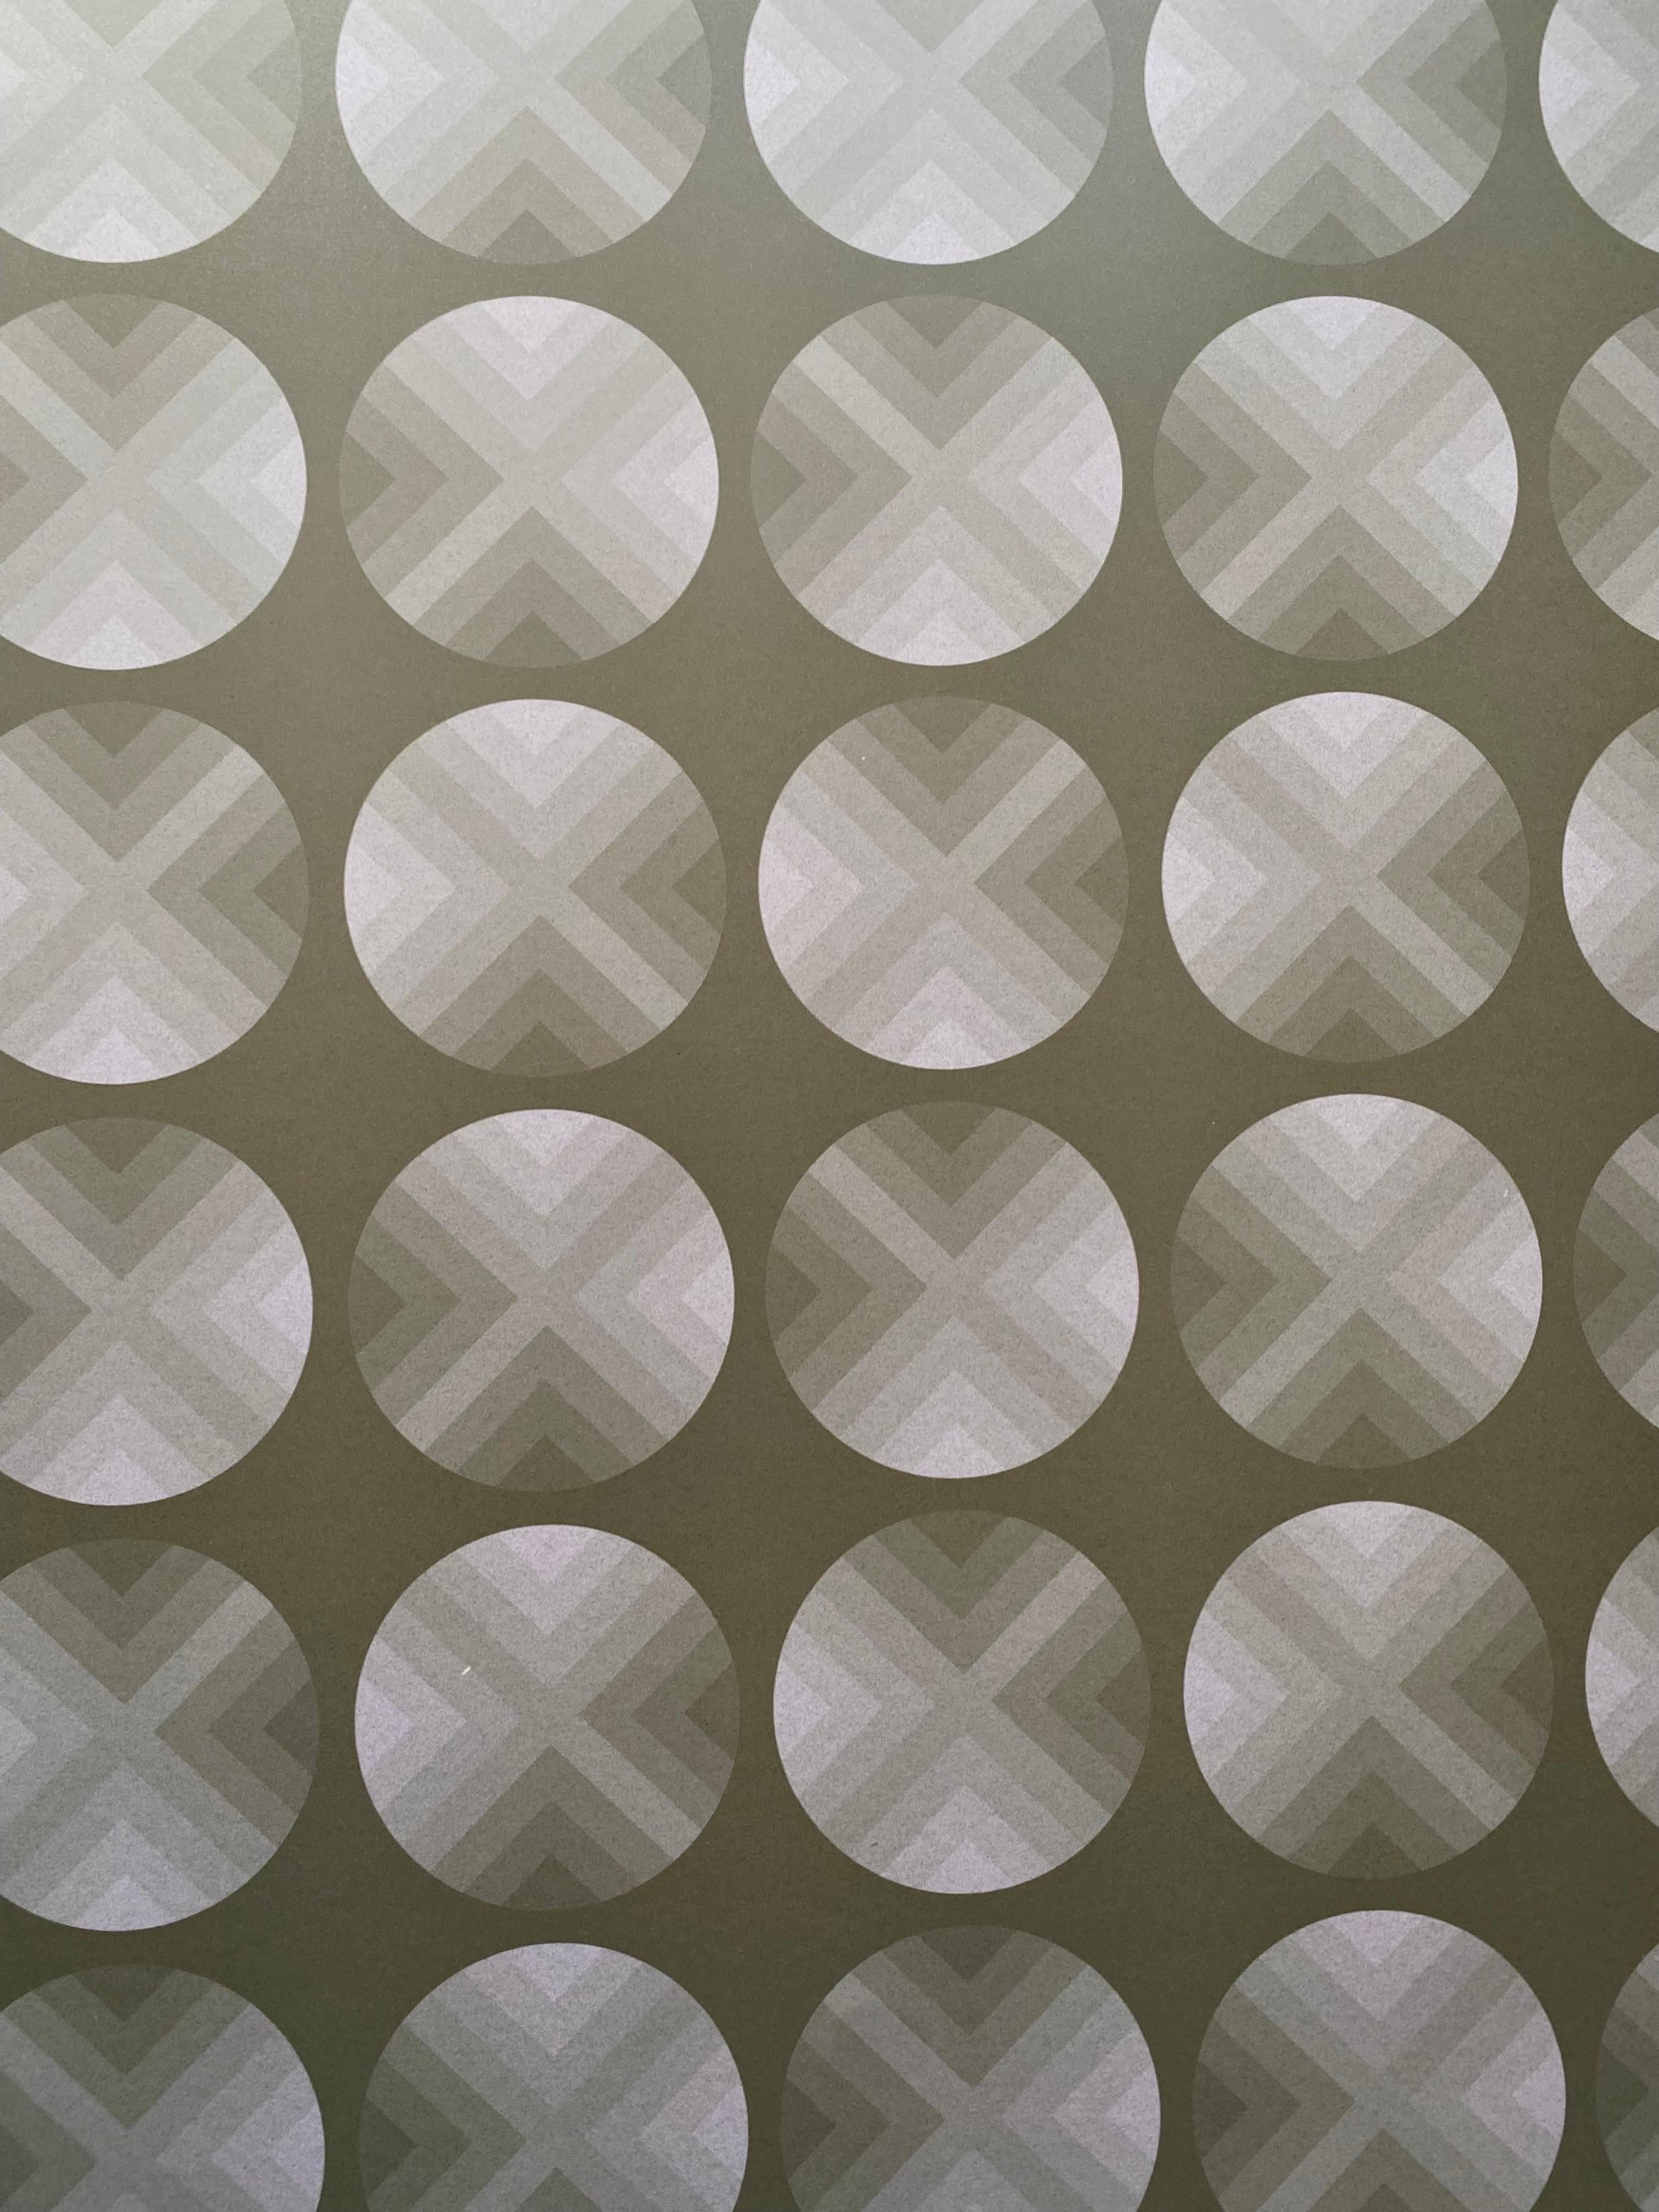 Jim Bird, Tribute to Vasarely 5, 1970 For Sale 1